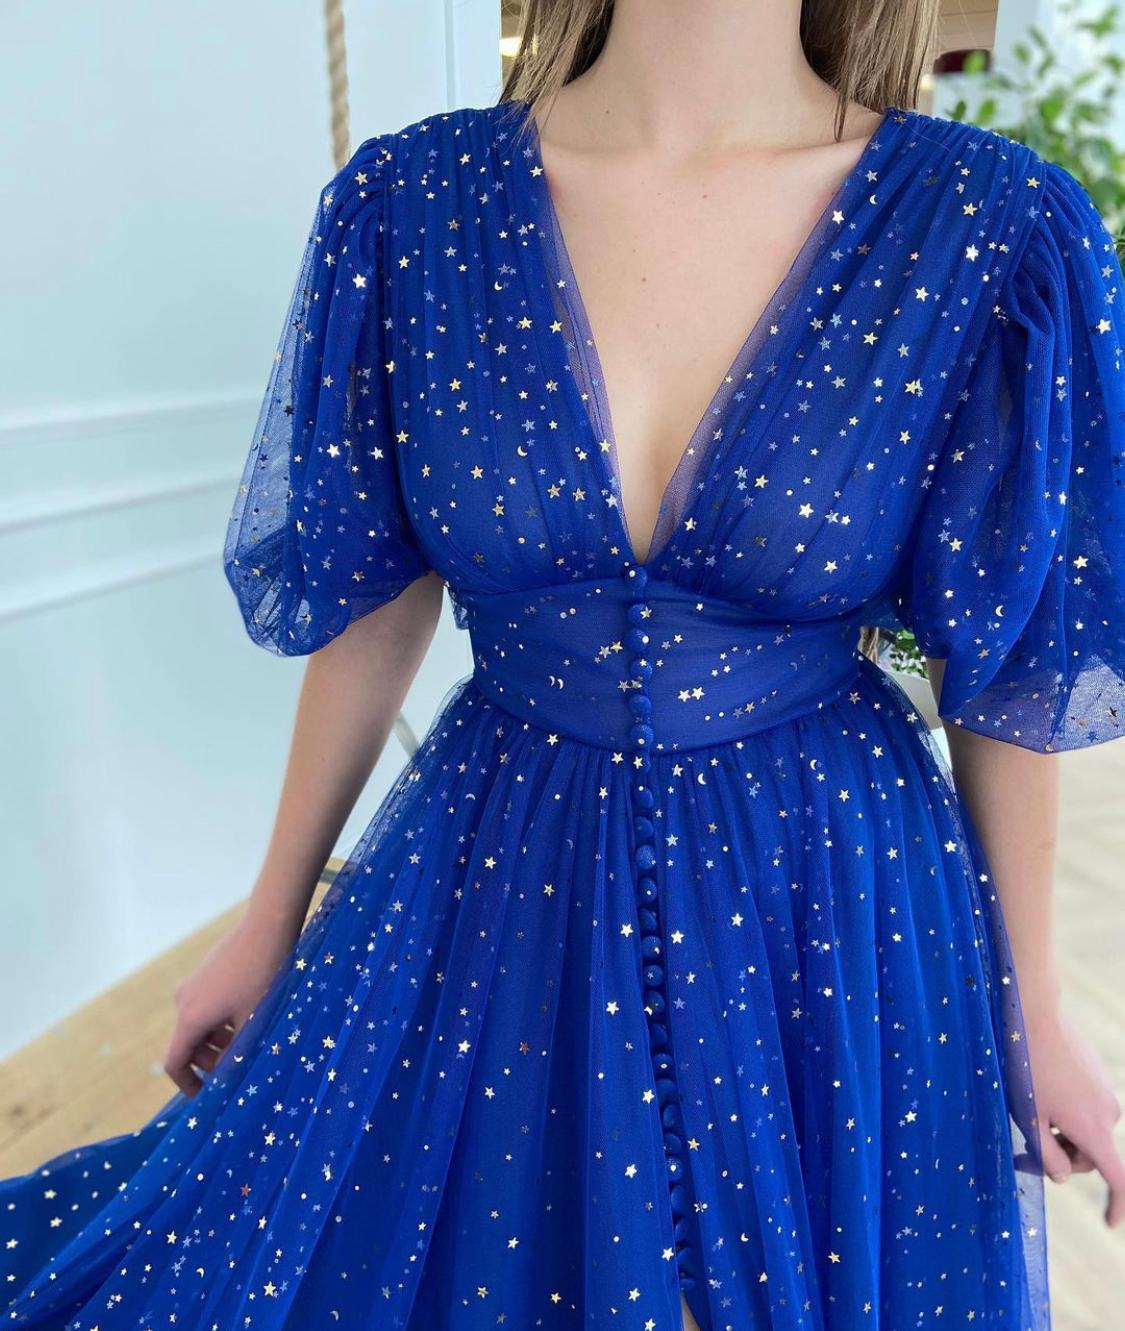 Blue midi dress with v-neck, short sleeves and starry fabric